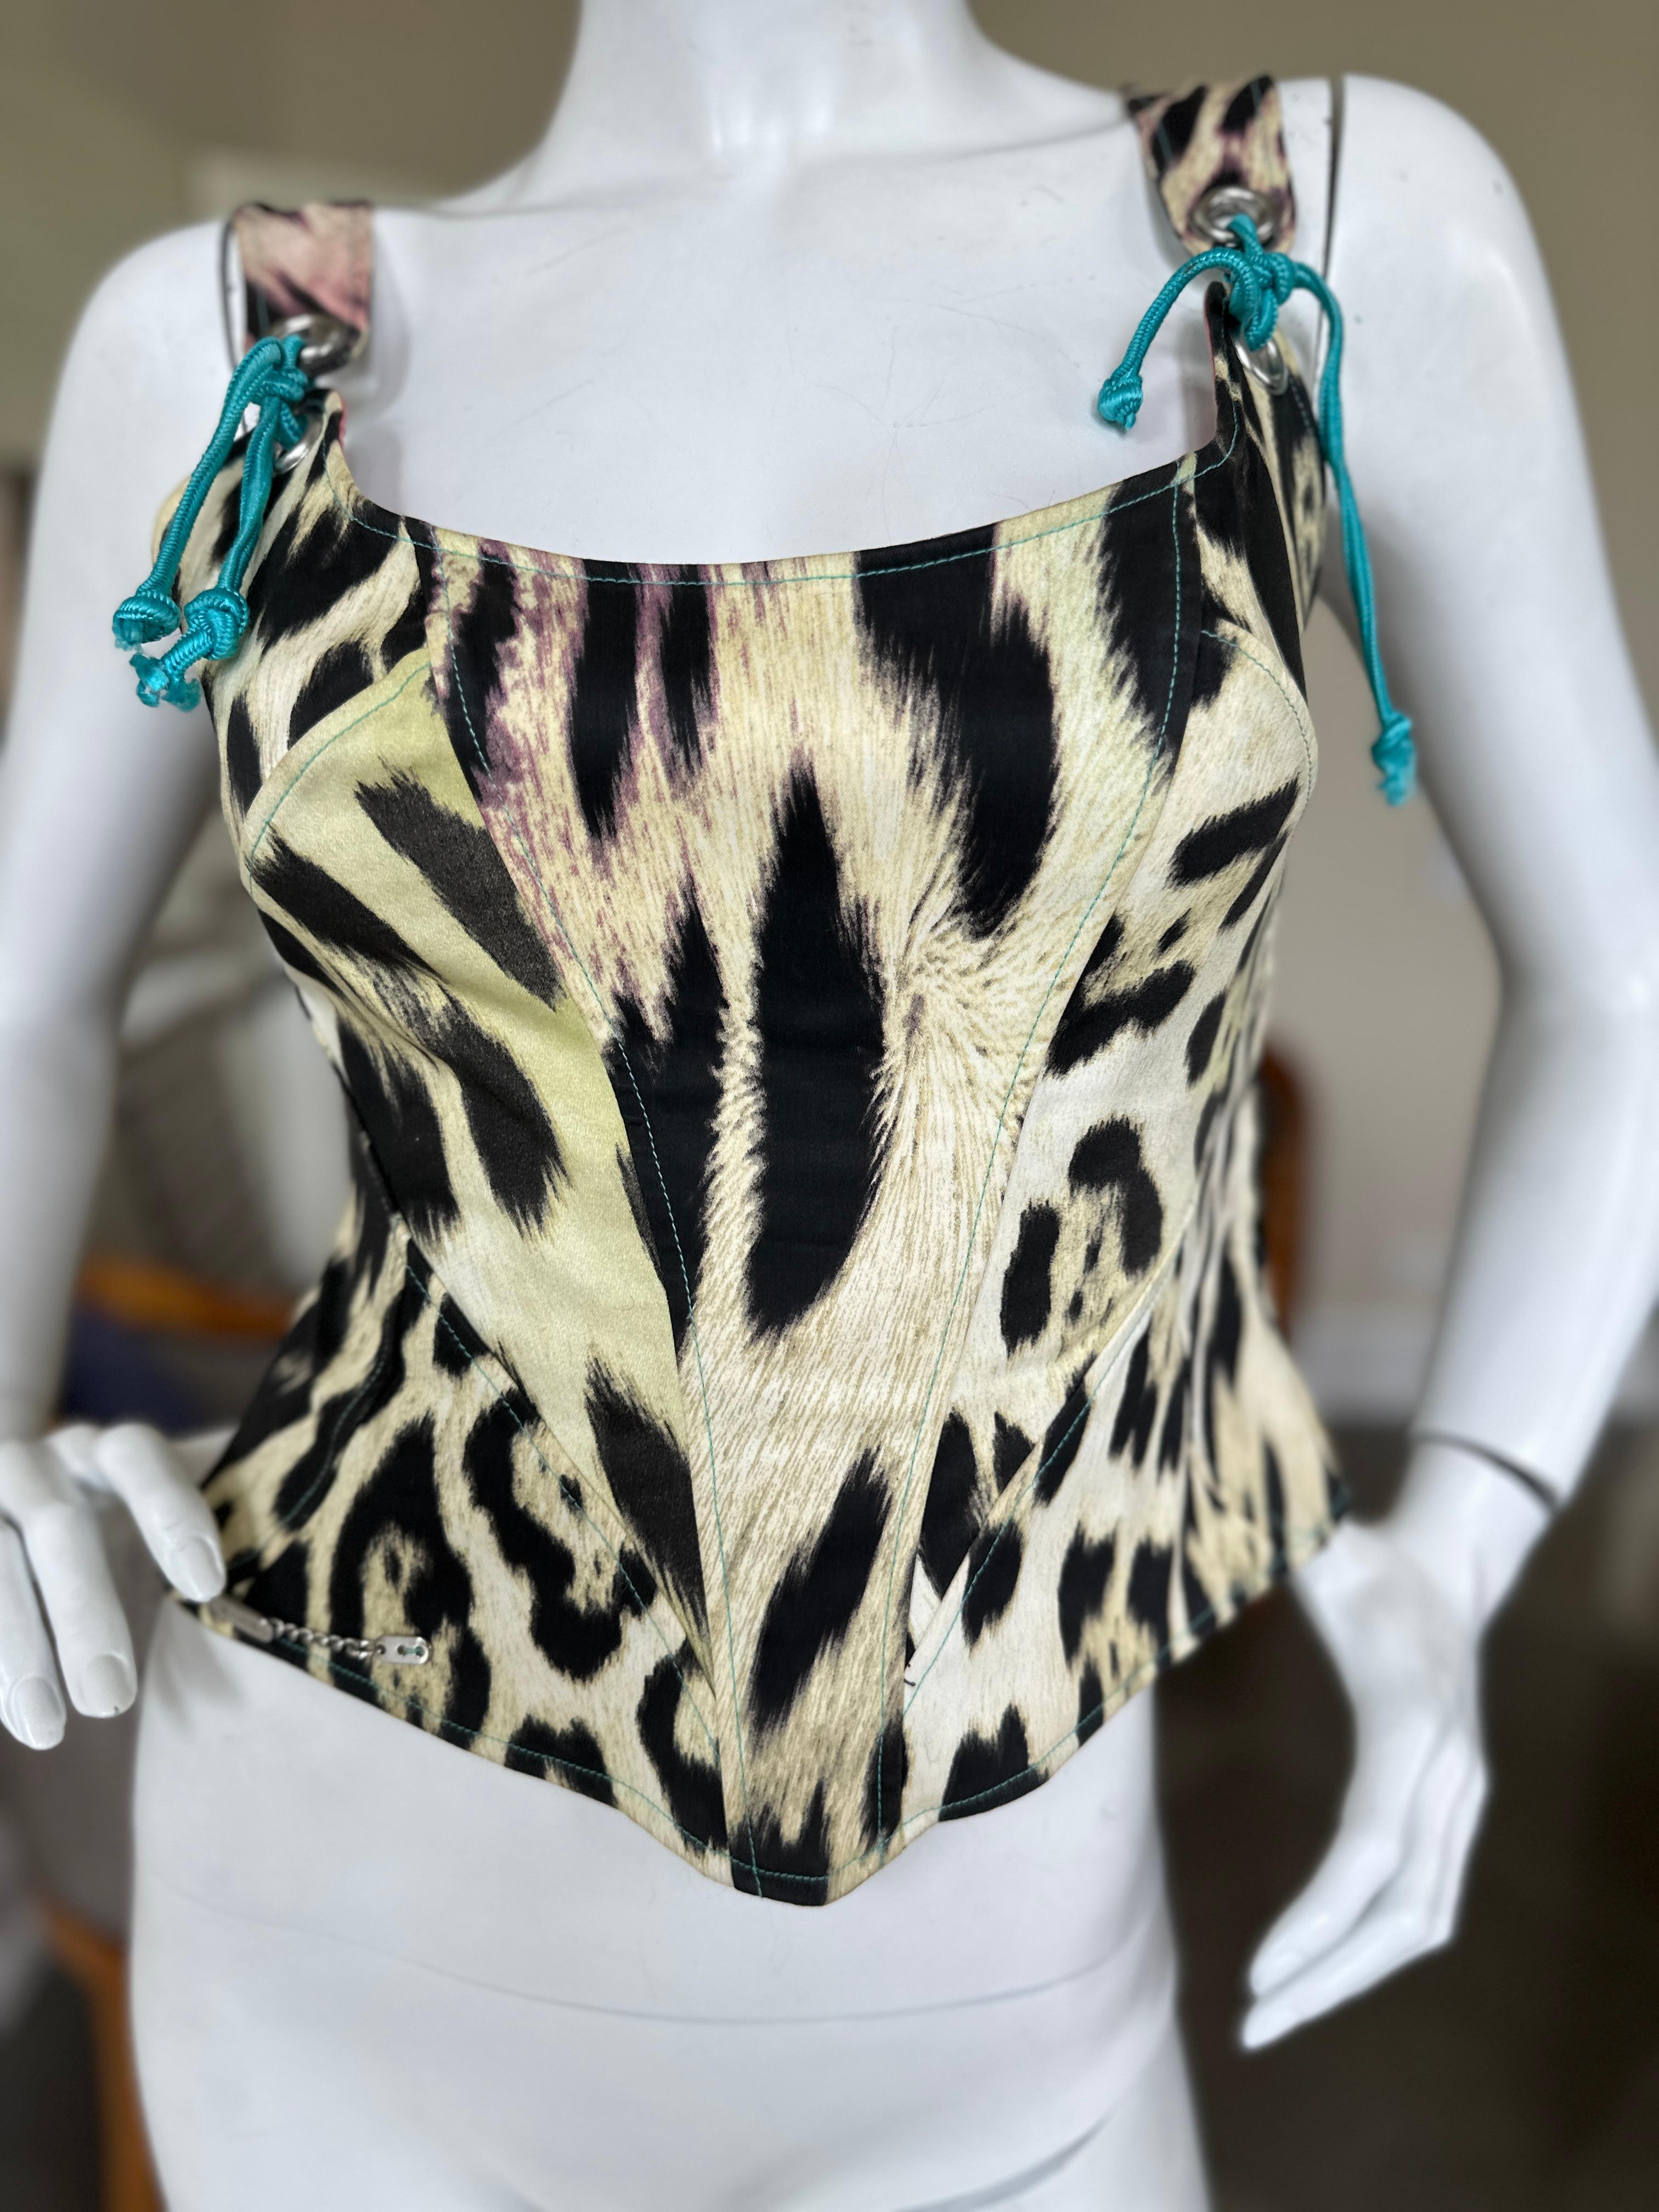 Roberto Cavalli for Just Cavalli Zebra Print Corset with Lace Up Details  In Excellent Condition For Sale In Cloverdale, CA